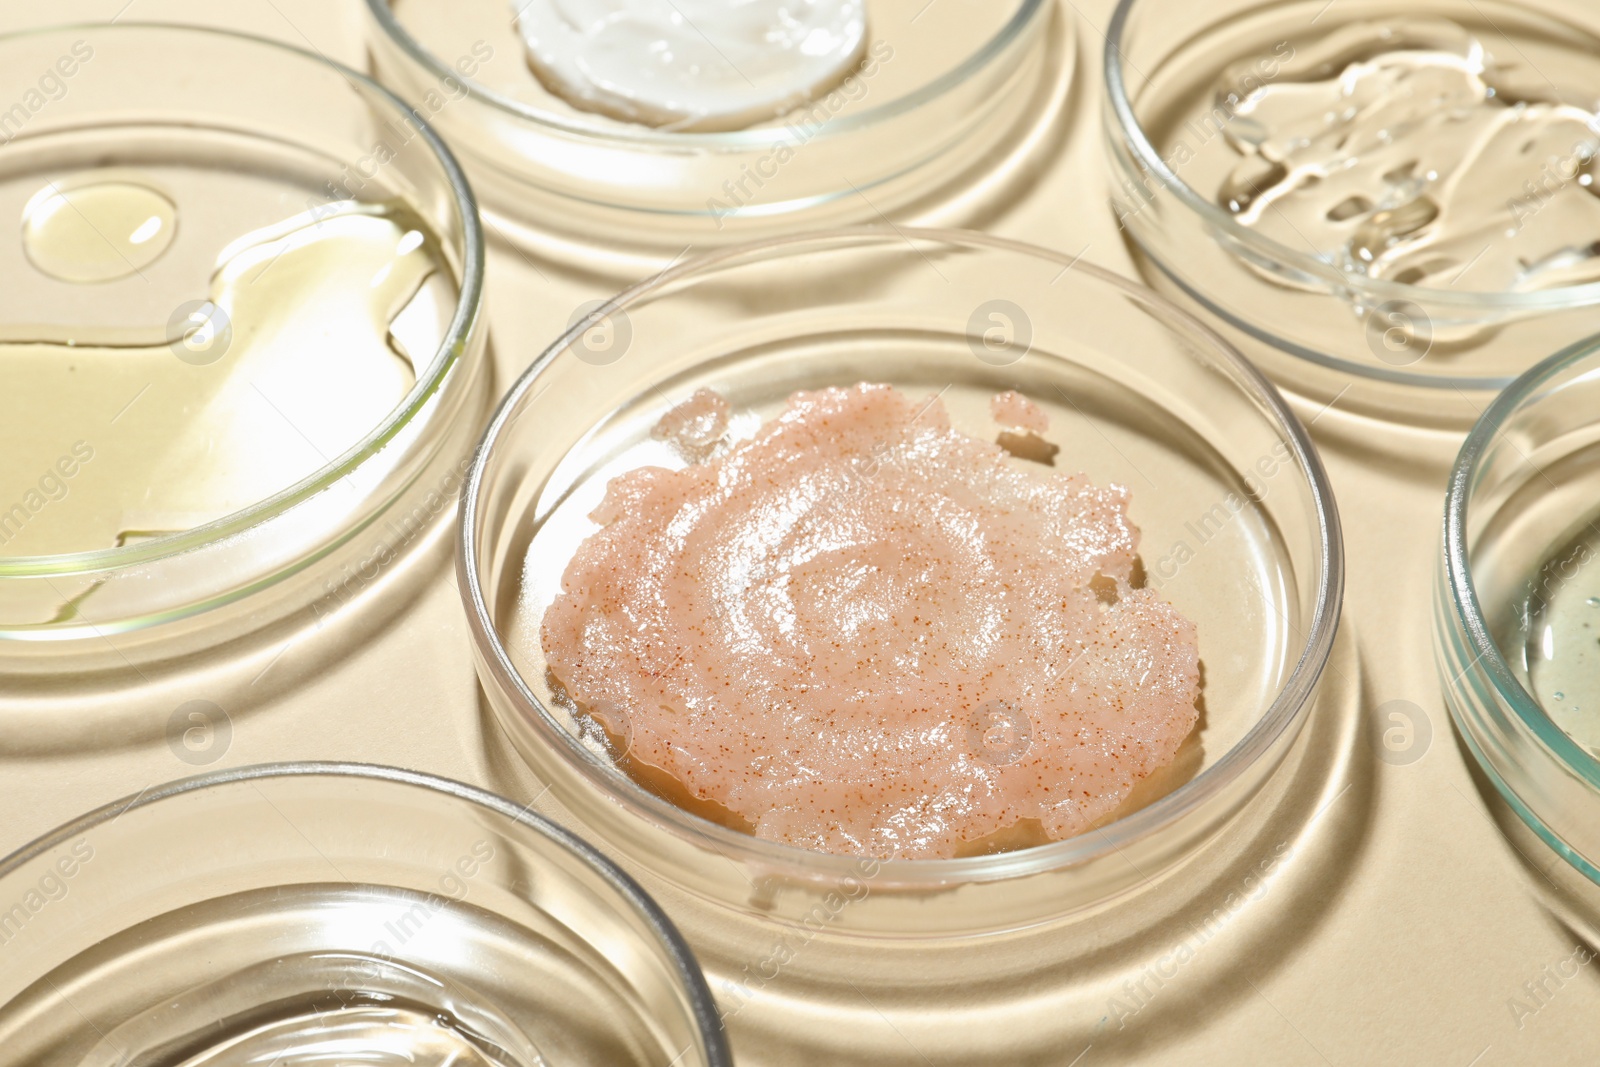 Photo of Many Petri dishes and cosmetic products on beige background, closeup